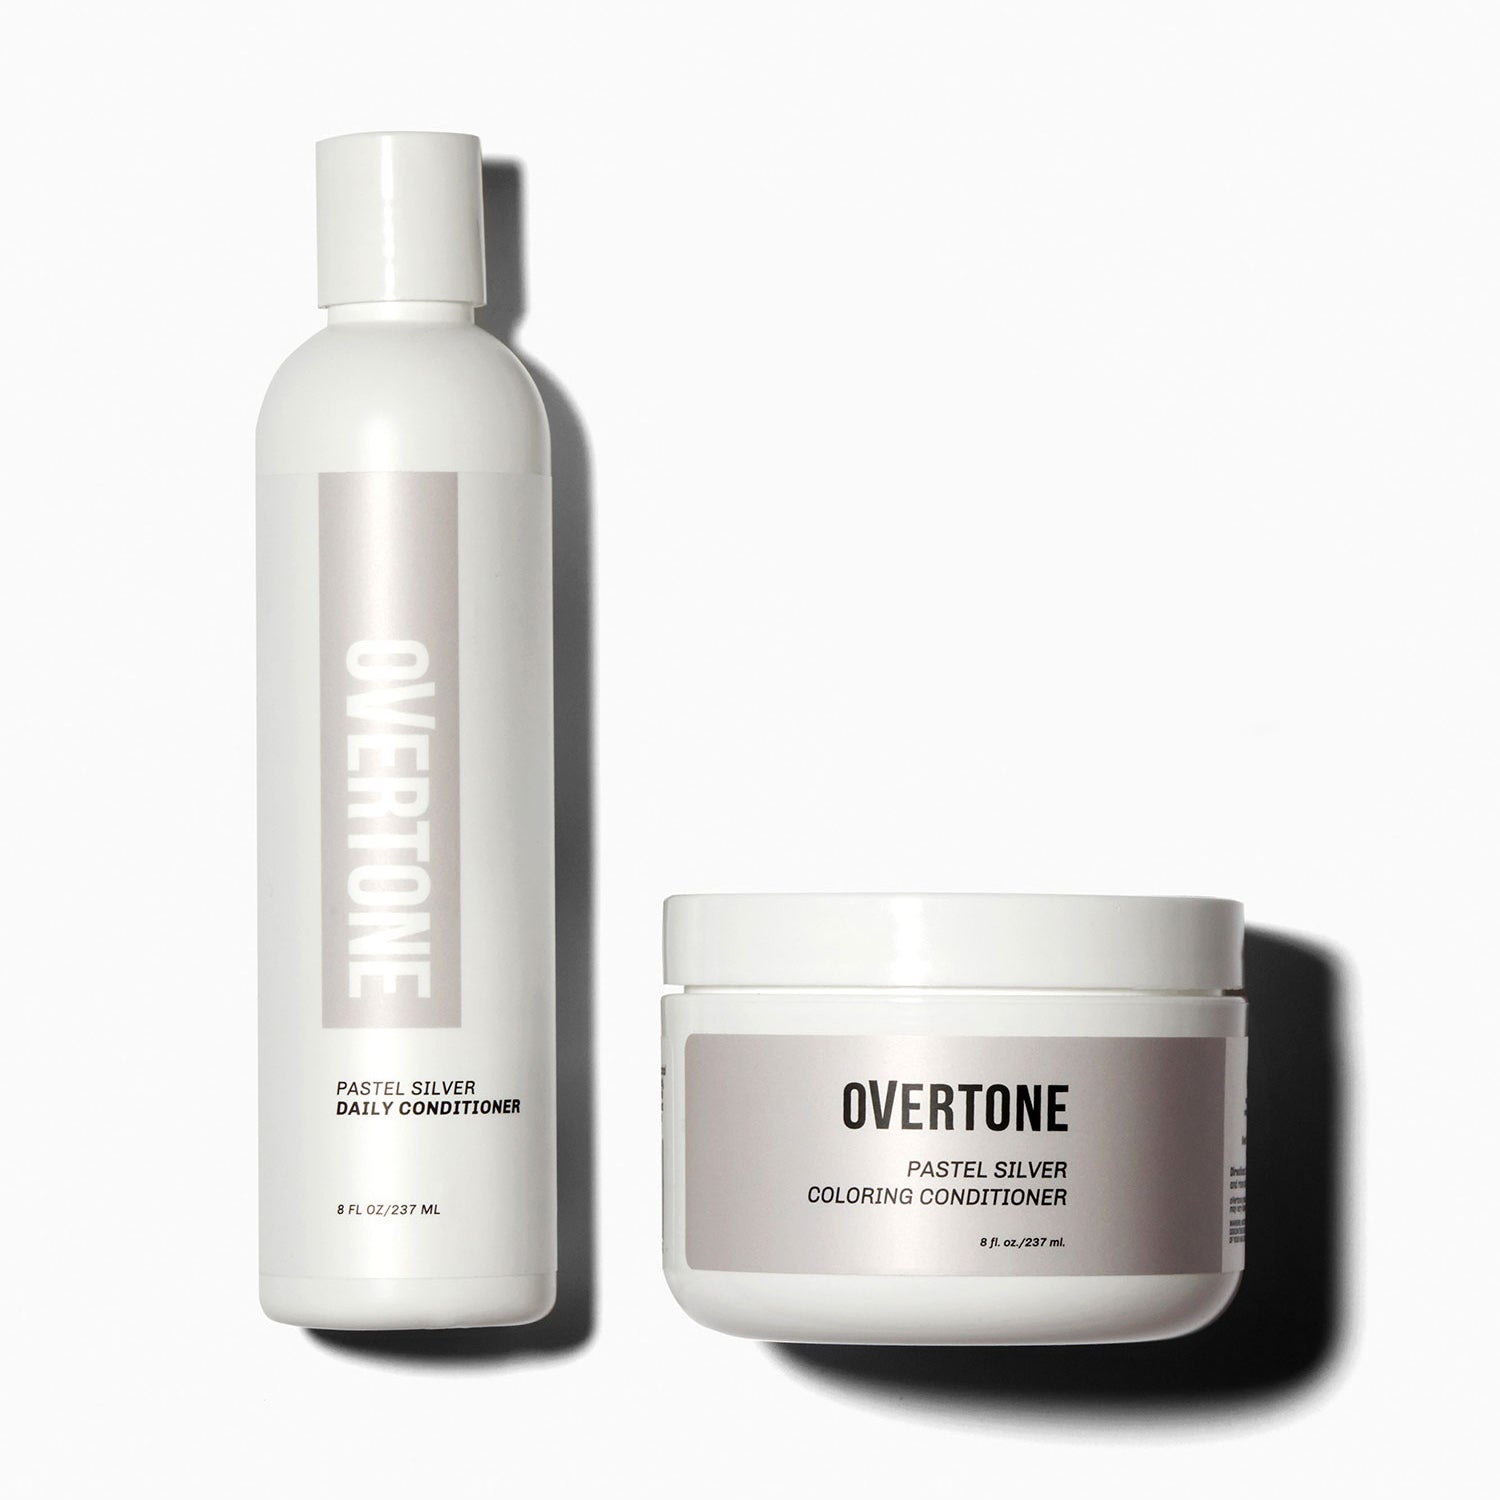 oVertone Pastel Silver Coloring Conditioner and Daily Conditioner